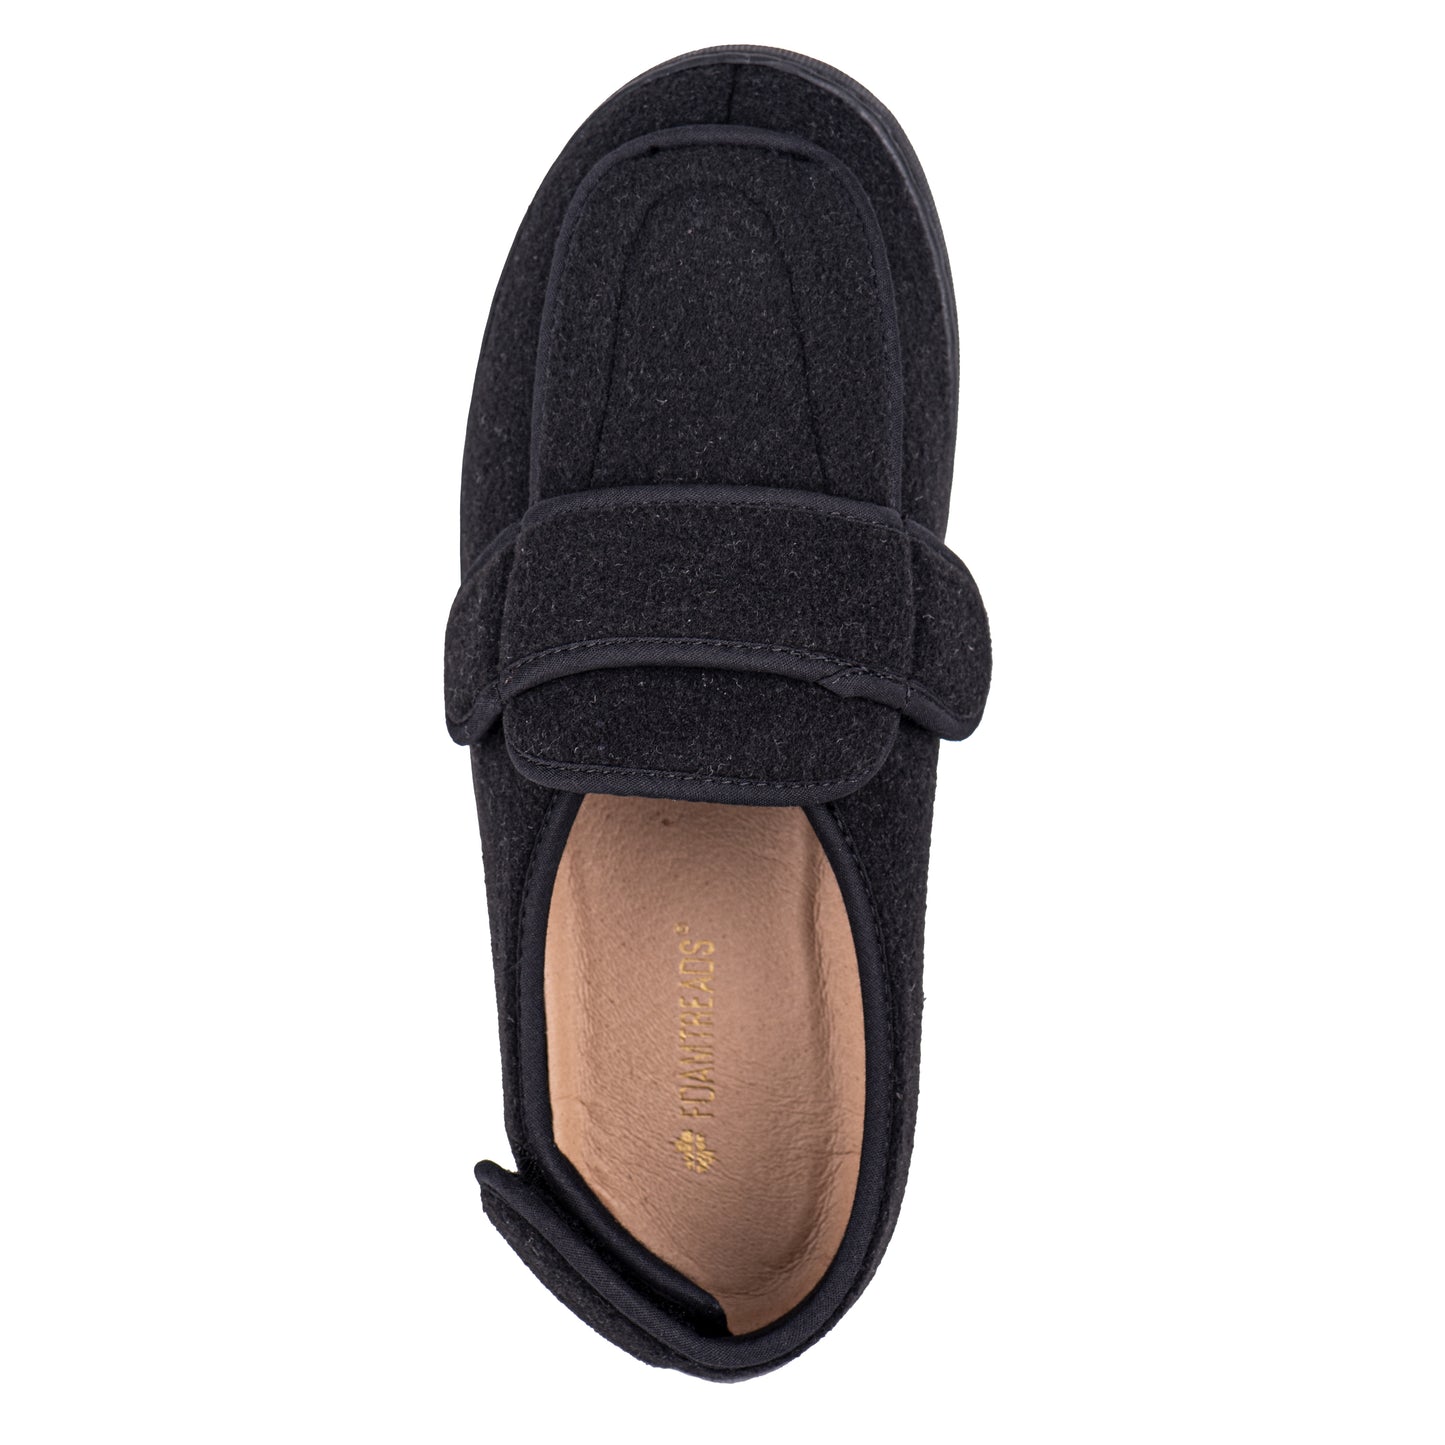 Slippers - Men's Foamtread Extra Depth (New Product!)